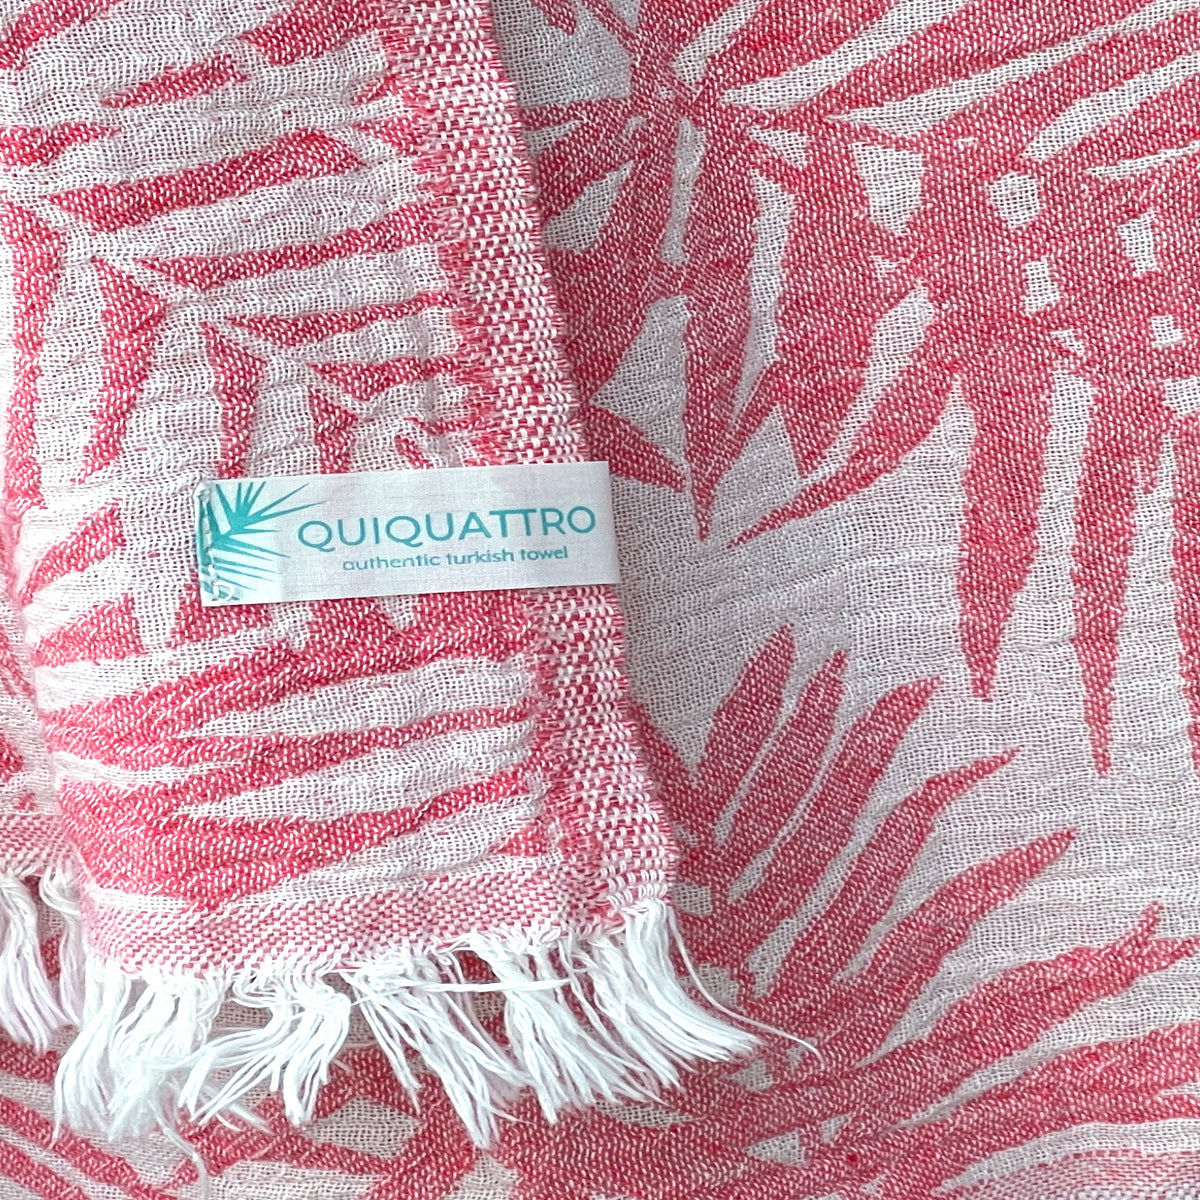 beach, for QuiQuattro and Quiquattro Towels – Authentic bath Turkish from more